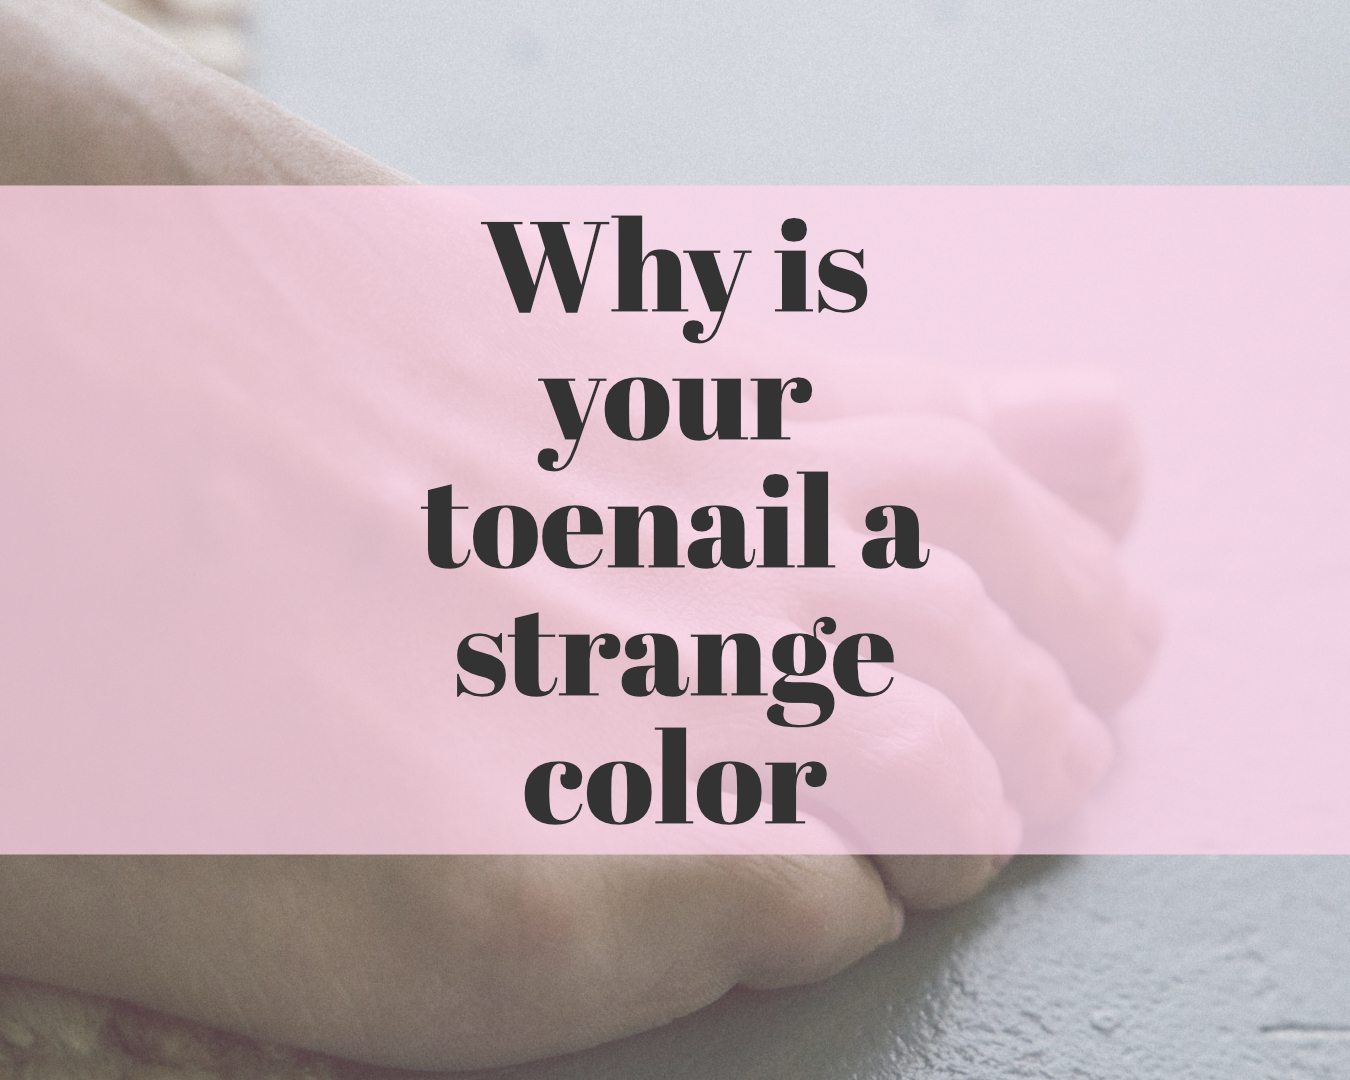 Why is your toenail a strange color